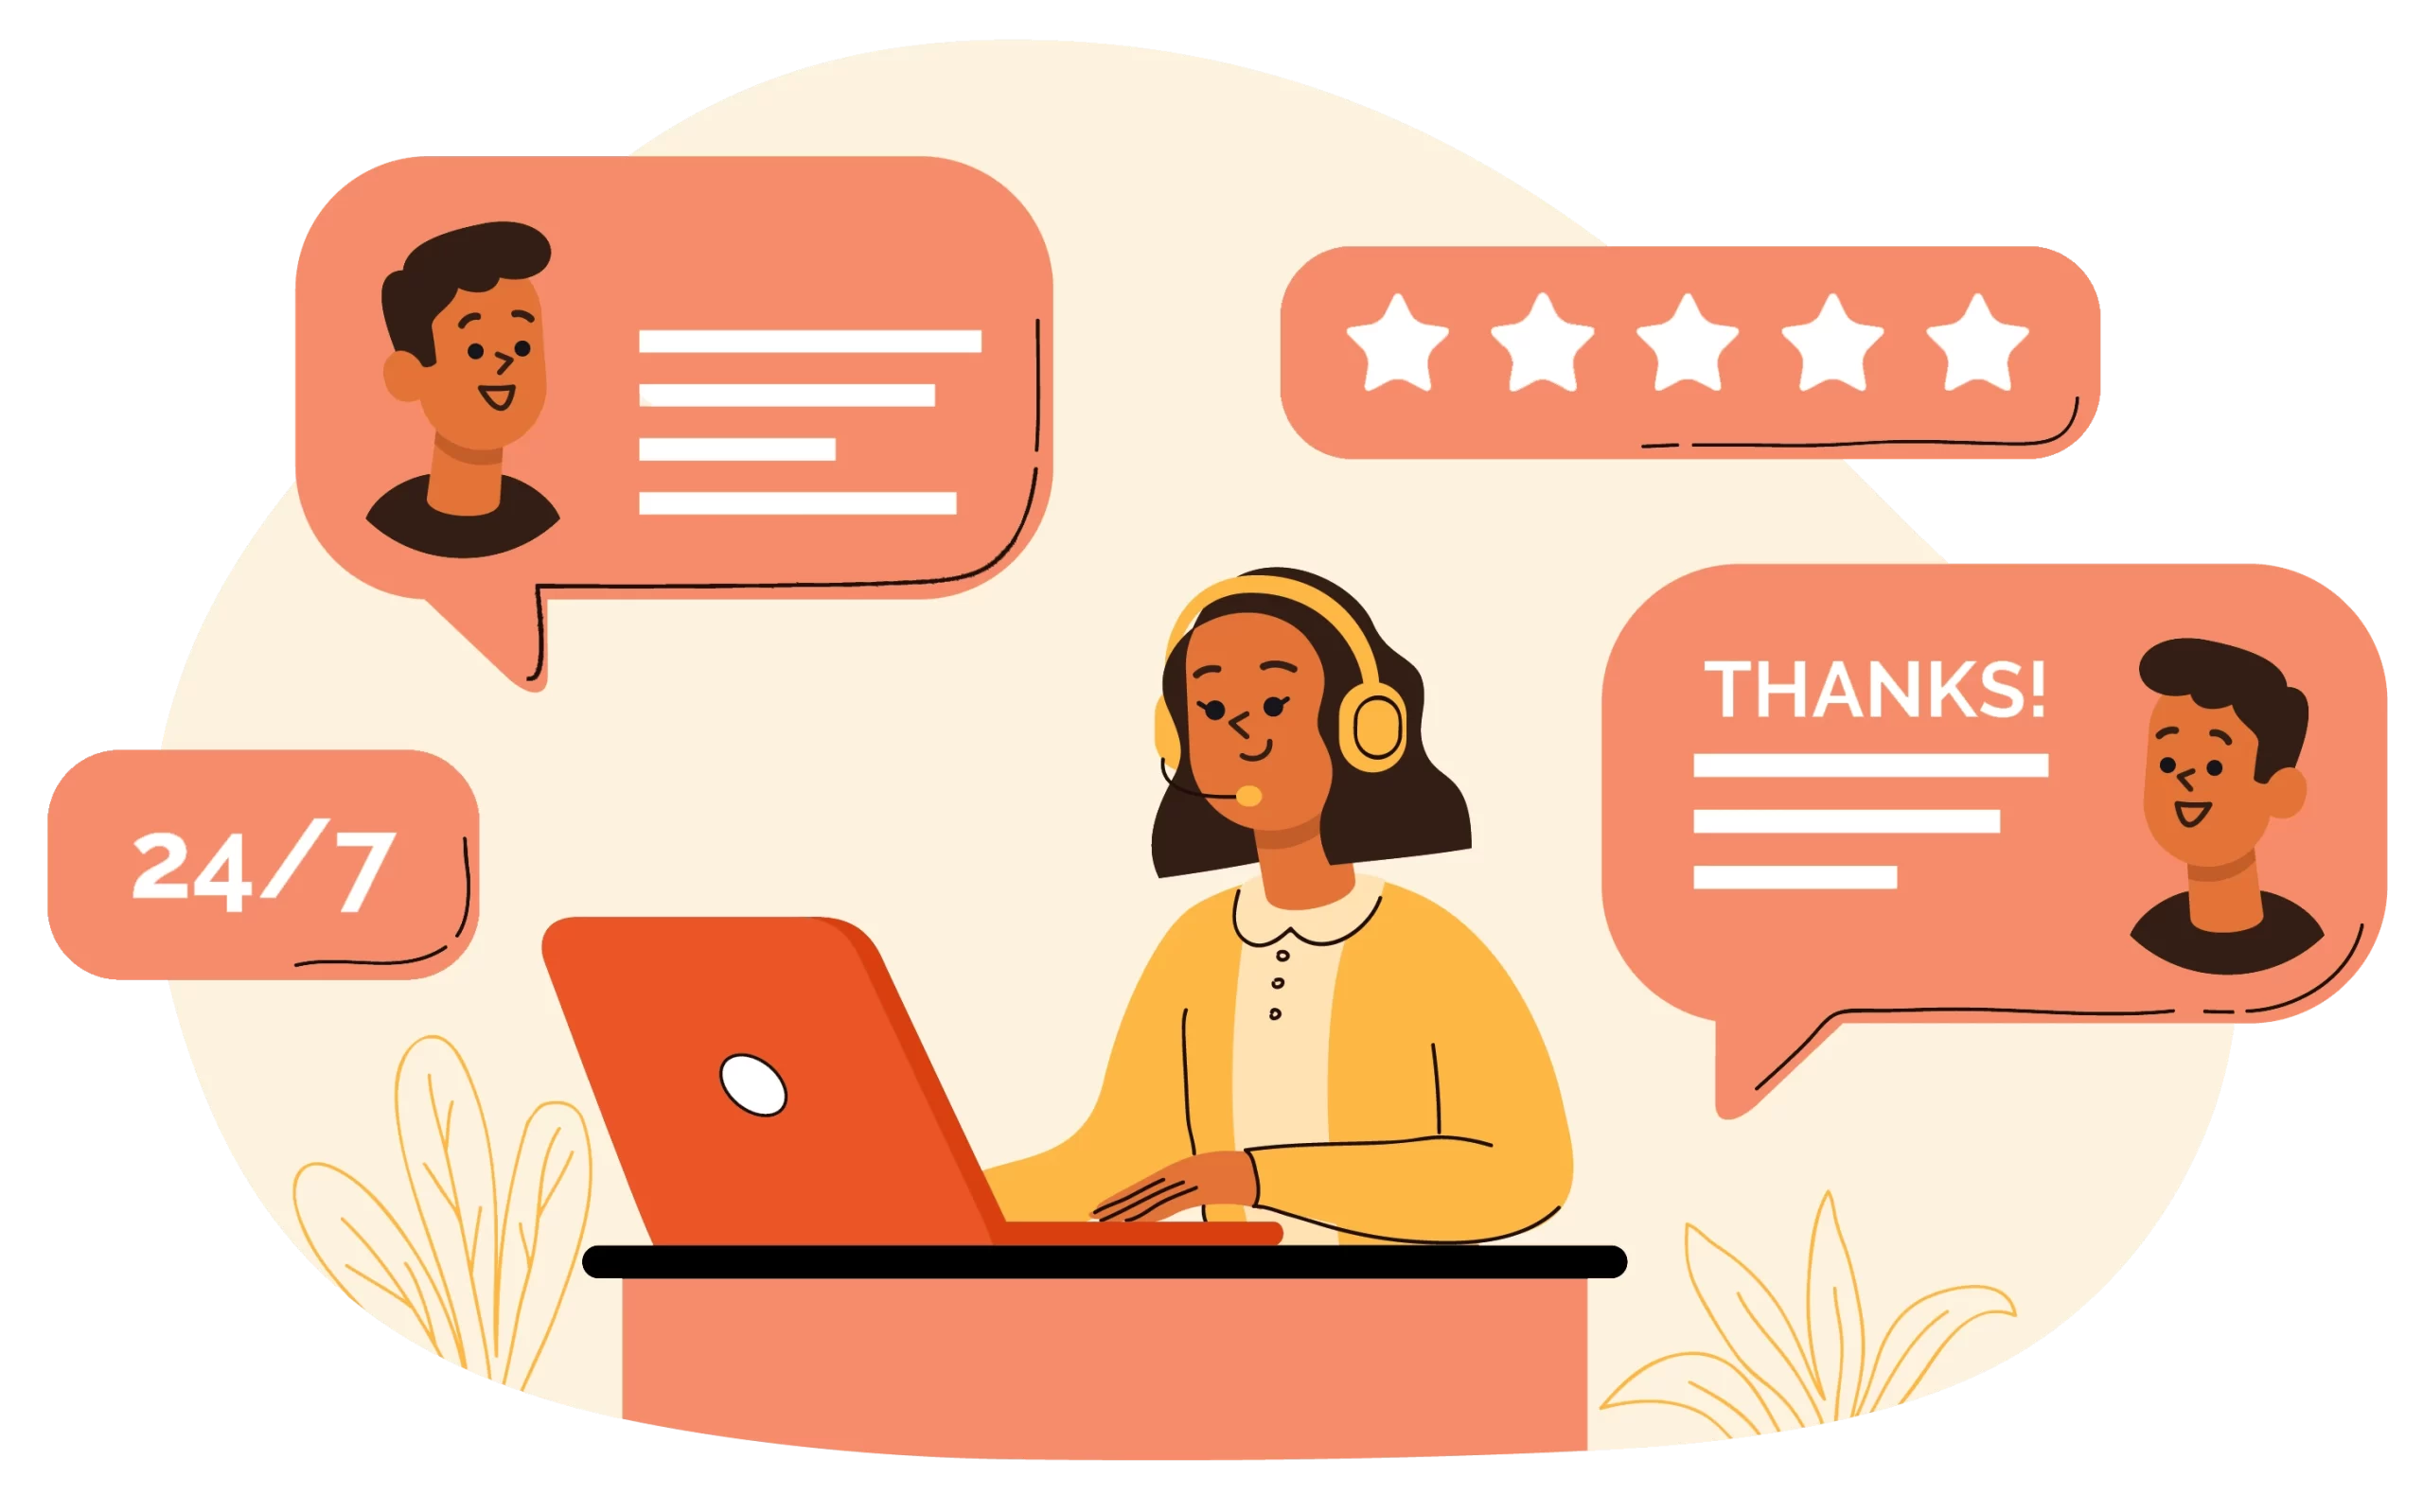 How to get good reviews and ratings for your courses on Shopify